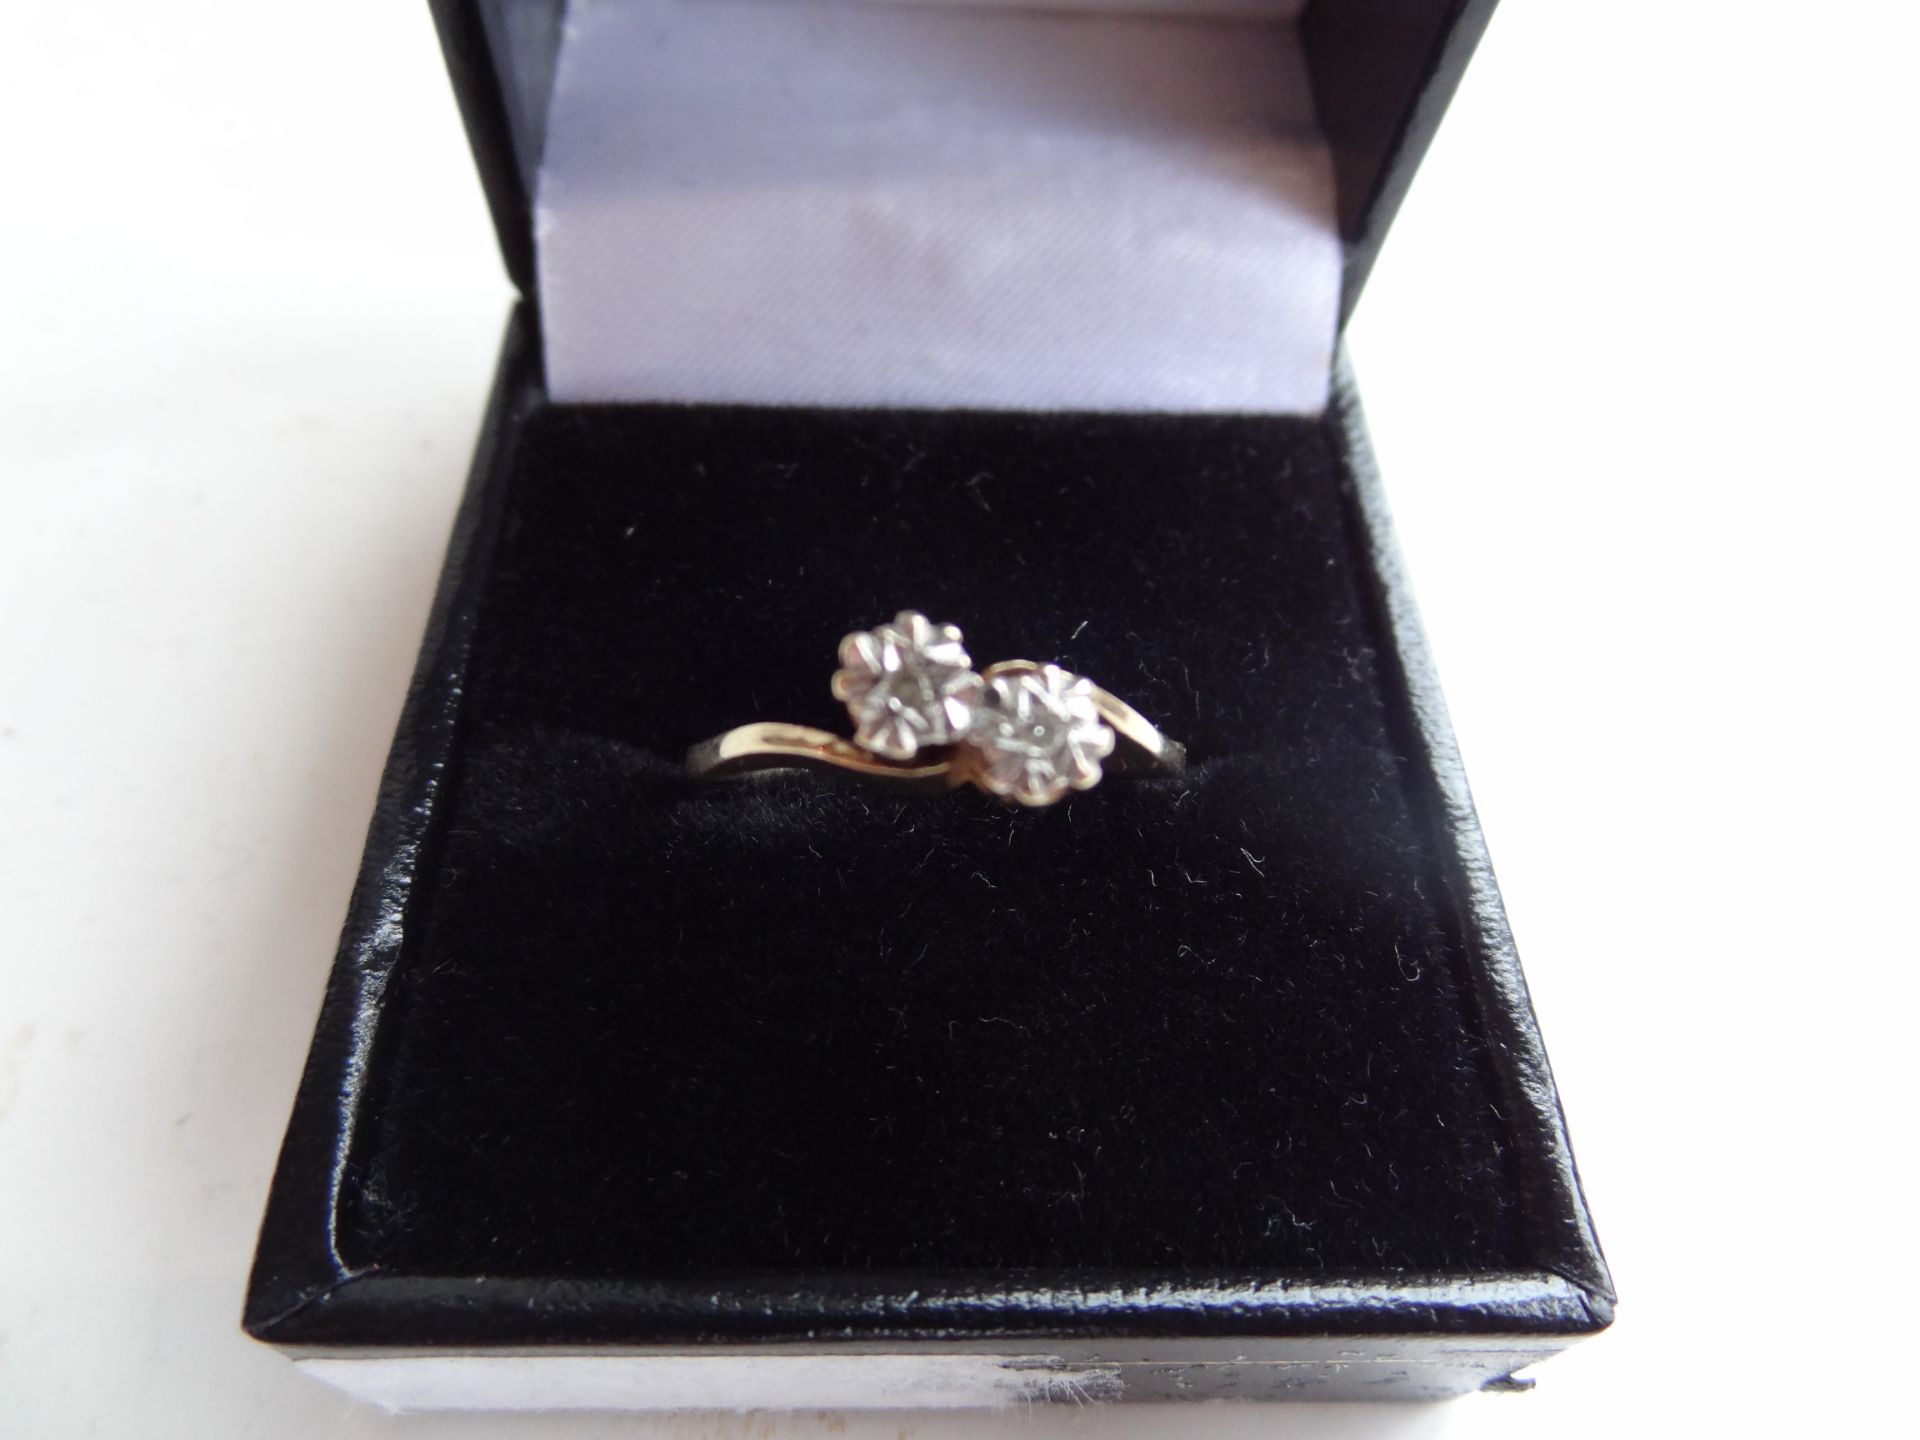 9CT Gold Ring Comprising Two Round Cut Diamond sin a White Gold Illusion Setting - Image 6 of 6